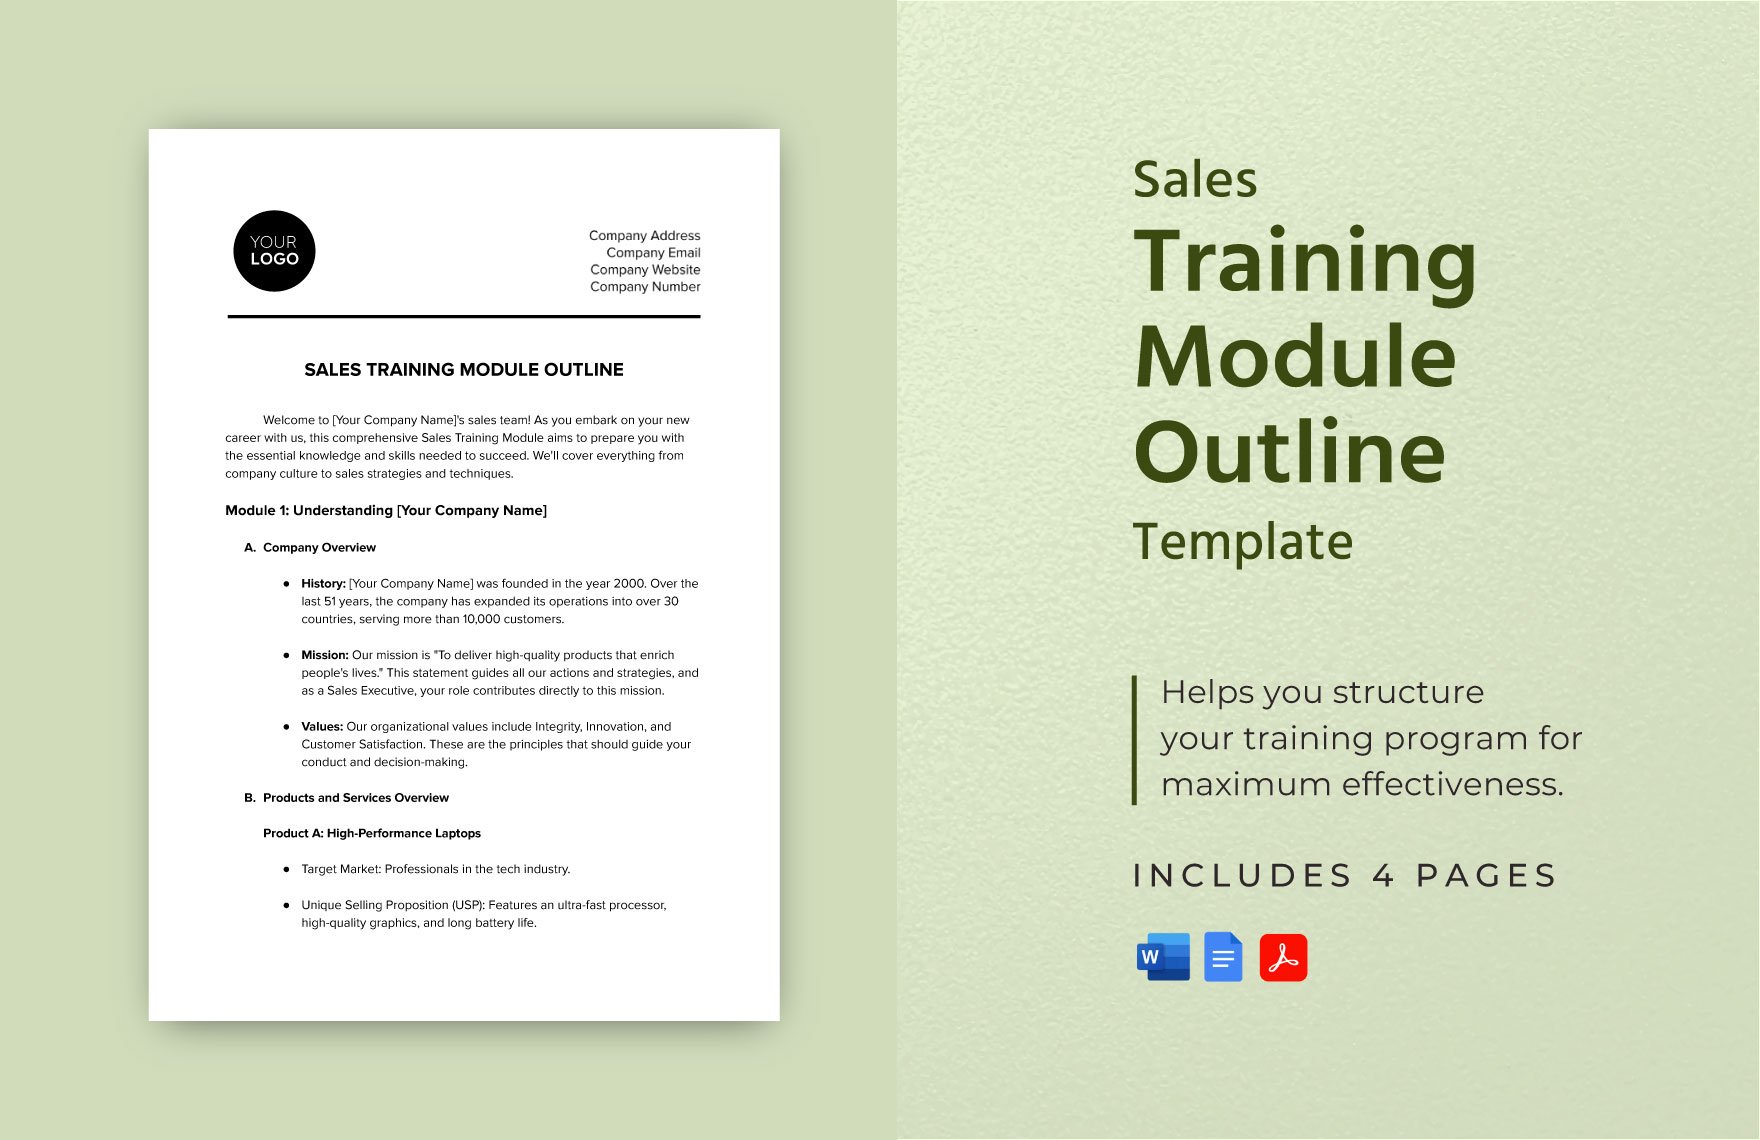 Sales Training Module Outline Template in PDF Word Google Docs